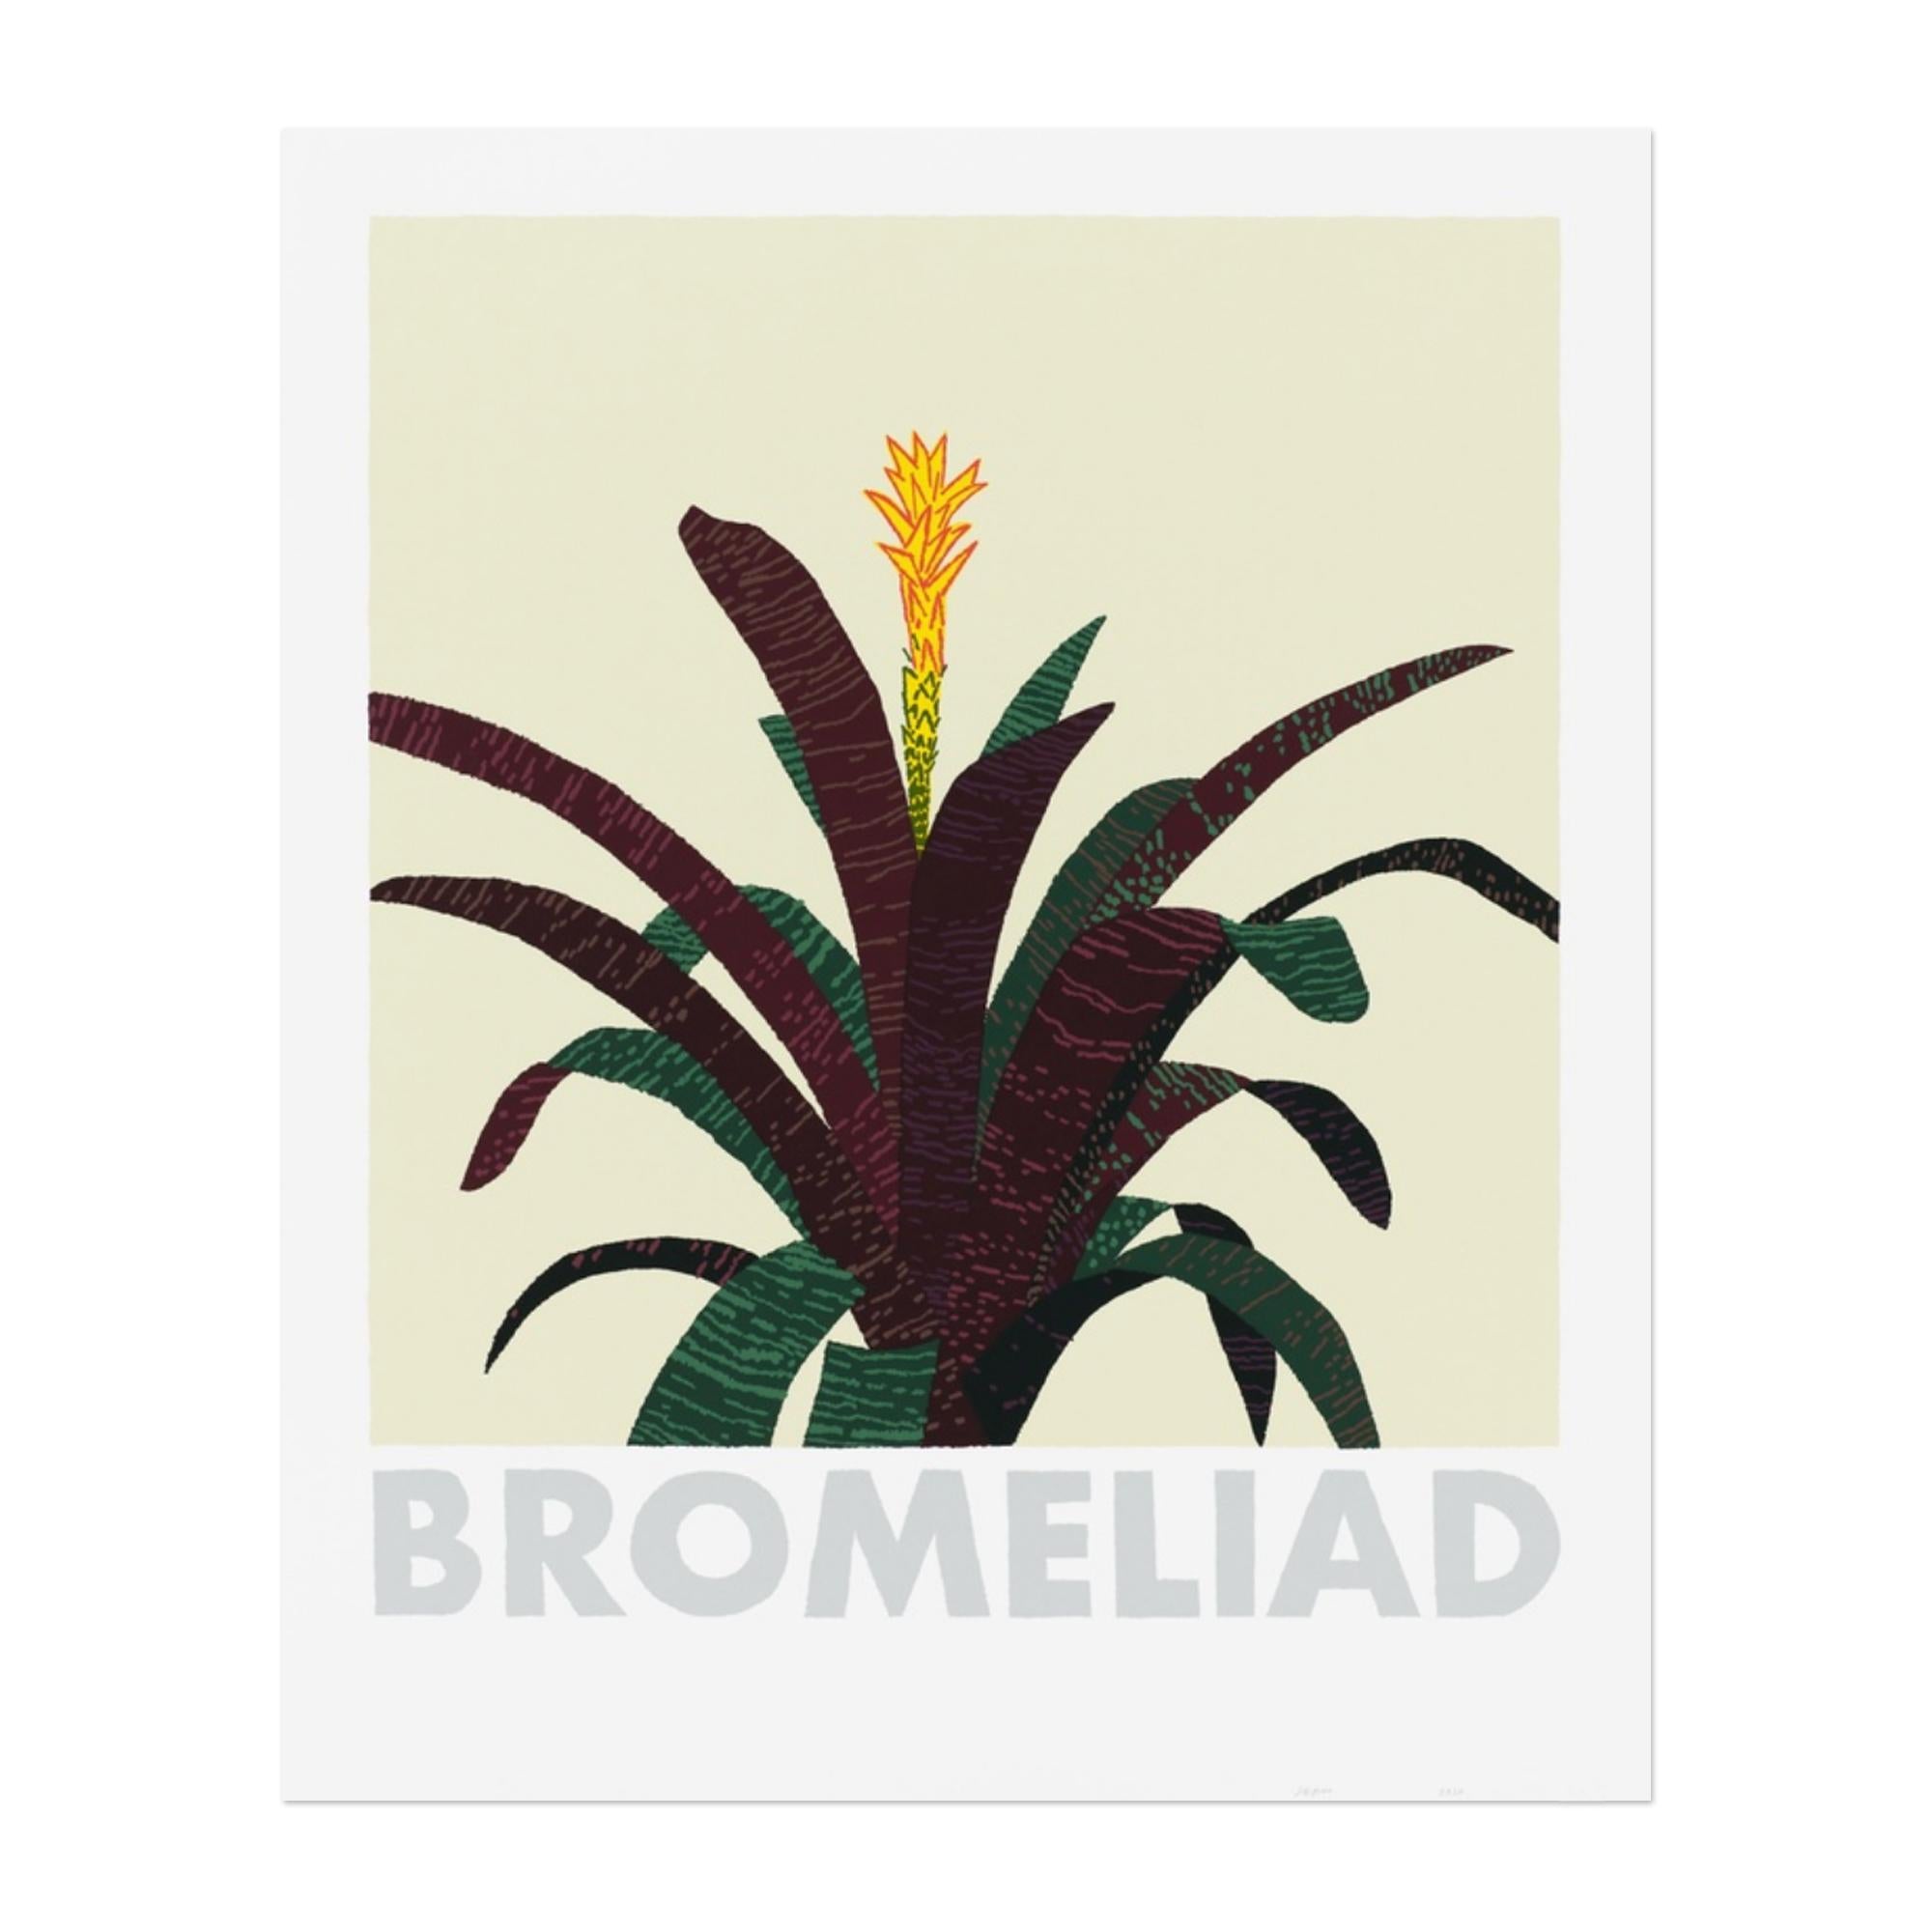 Jonas Wood (American, b. 1977)
Bromeliad, 2020
Medium: 13-color screen print on rising museum board
Dimensions: 28 × 23 in (71.1 × 58.4 cm)
Edition of 200: Hand-signed and numbered
Condition: Excellent